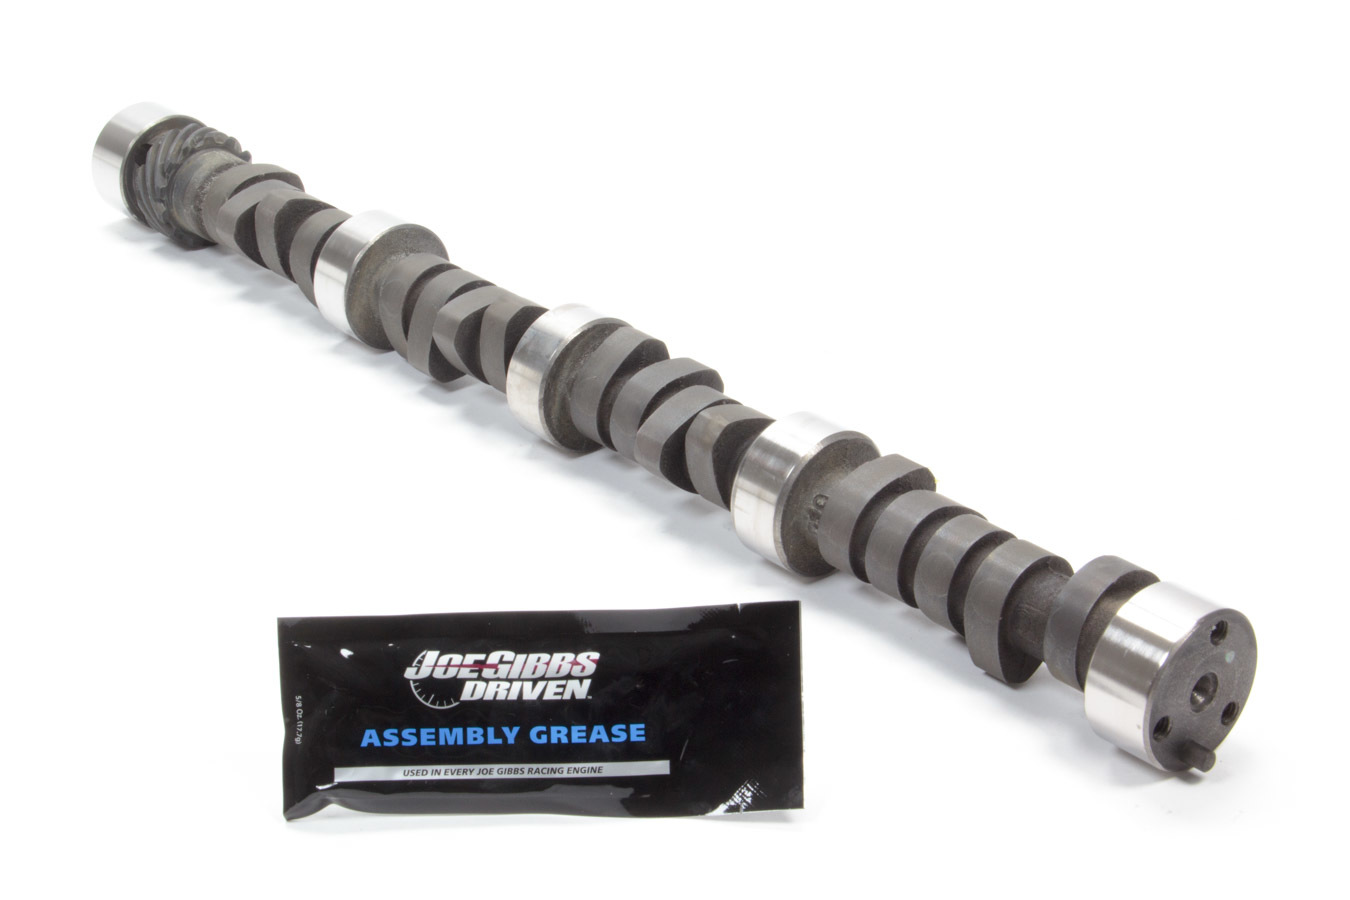 Howards Cams 110071-06 Camshaft, Oval Track Lift Rule, Hydraulic Flat Tappet, Lift 0.410 / 0.410 in, Duration 274 / 274, 106 LSA, 2500 / 6000 RPM, Small Block Chevy, Each